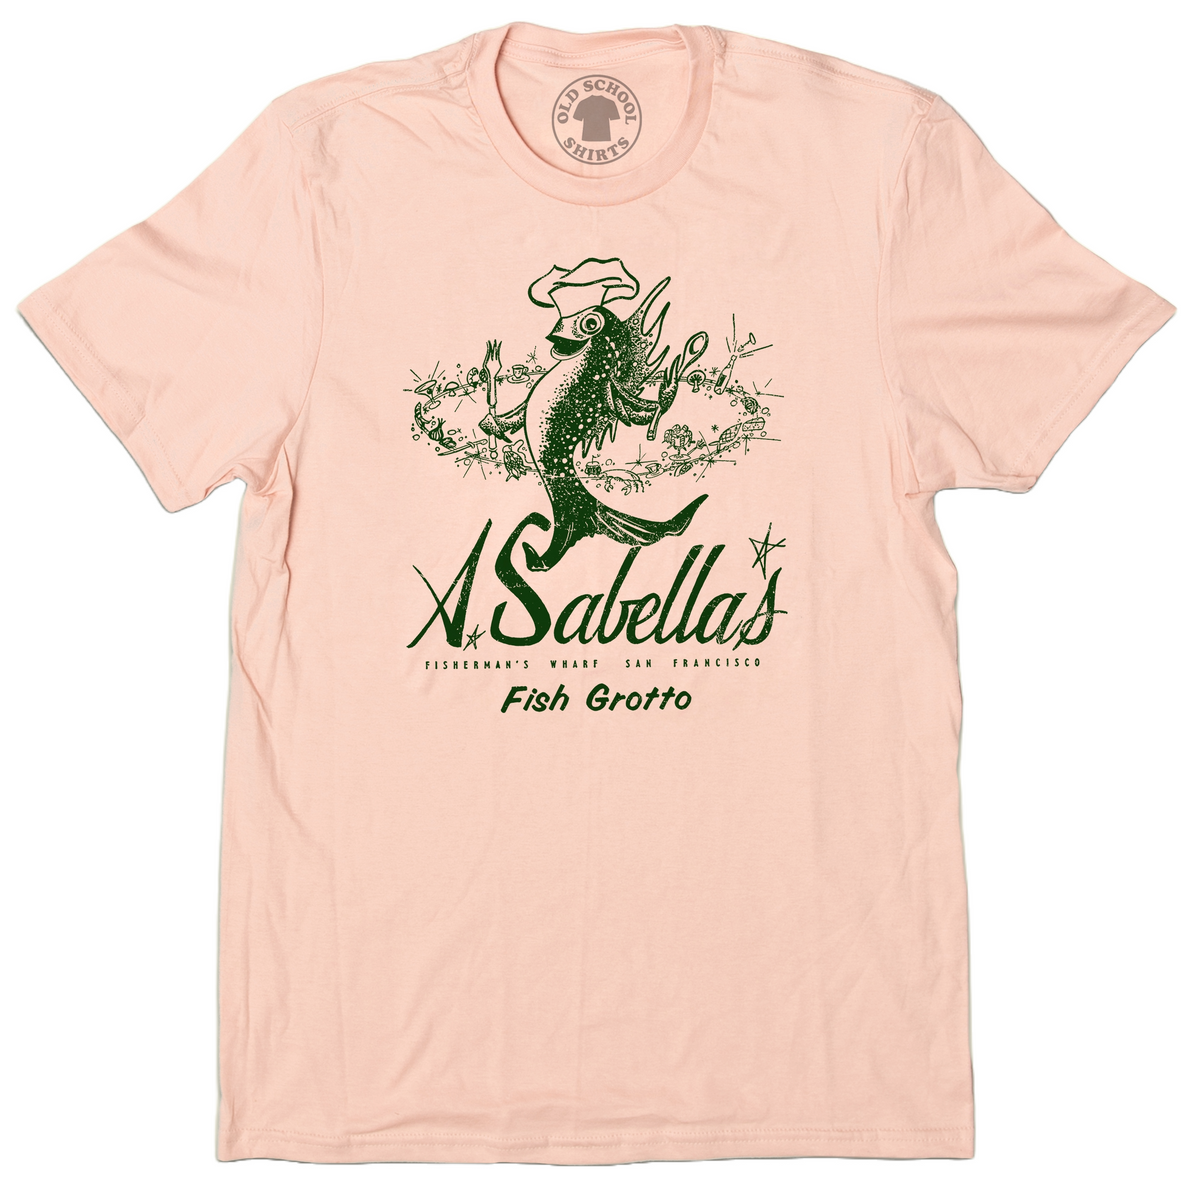 A. Sabella's Fish Grotto Unisex Tee